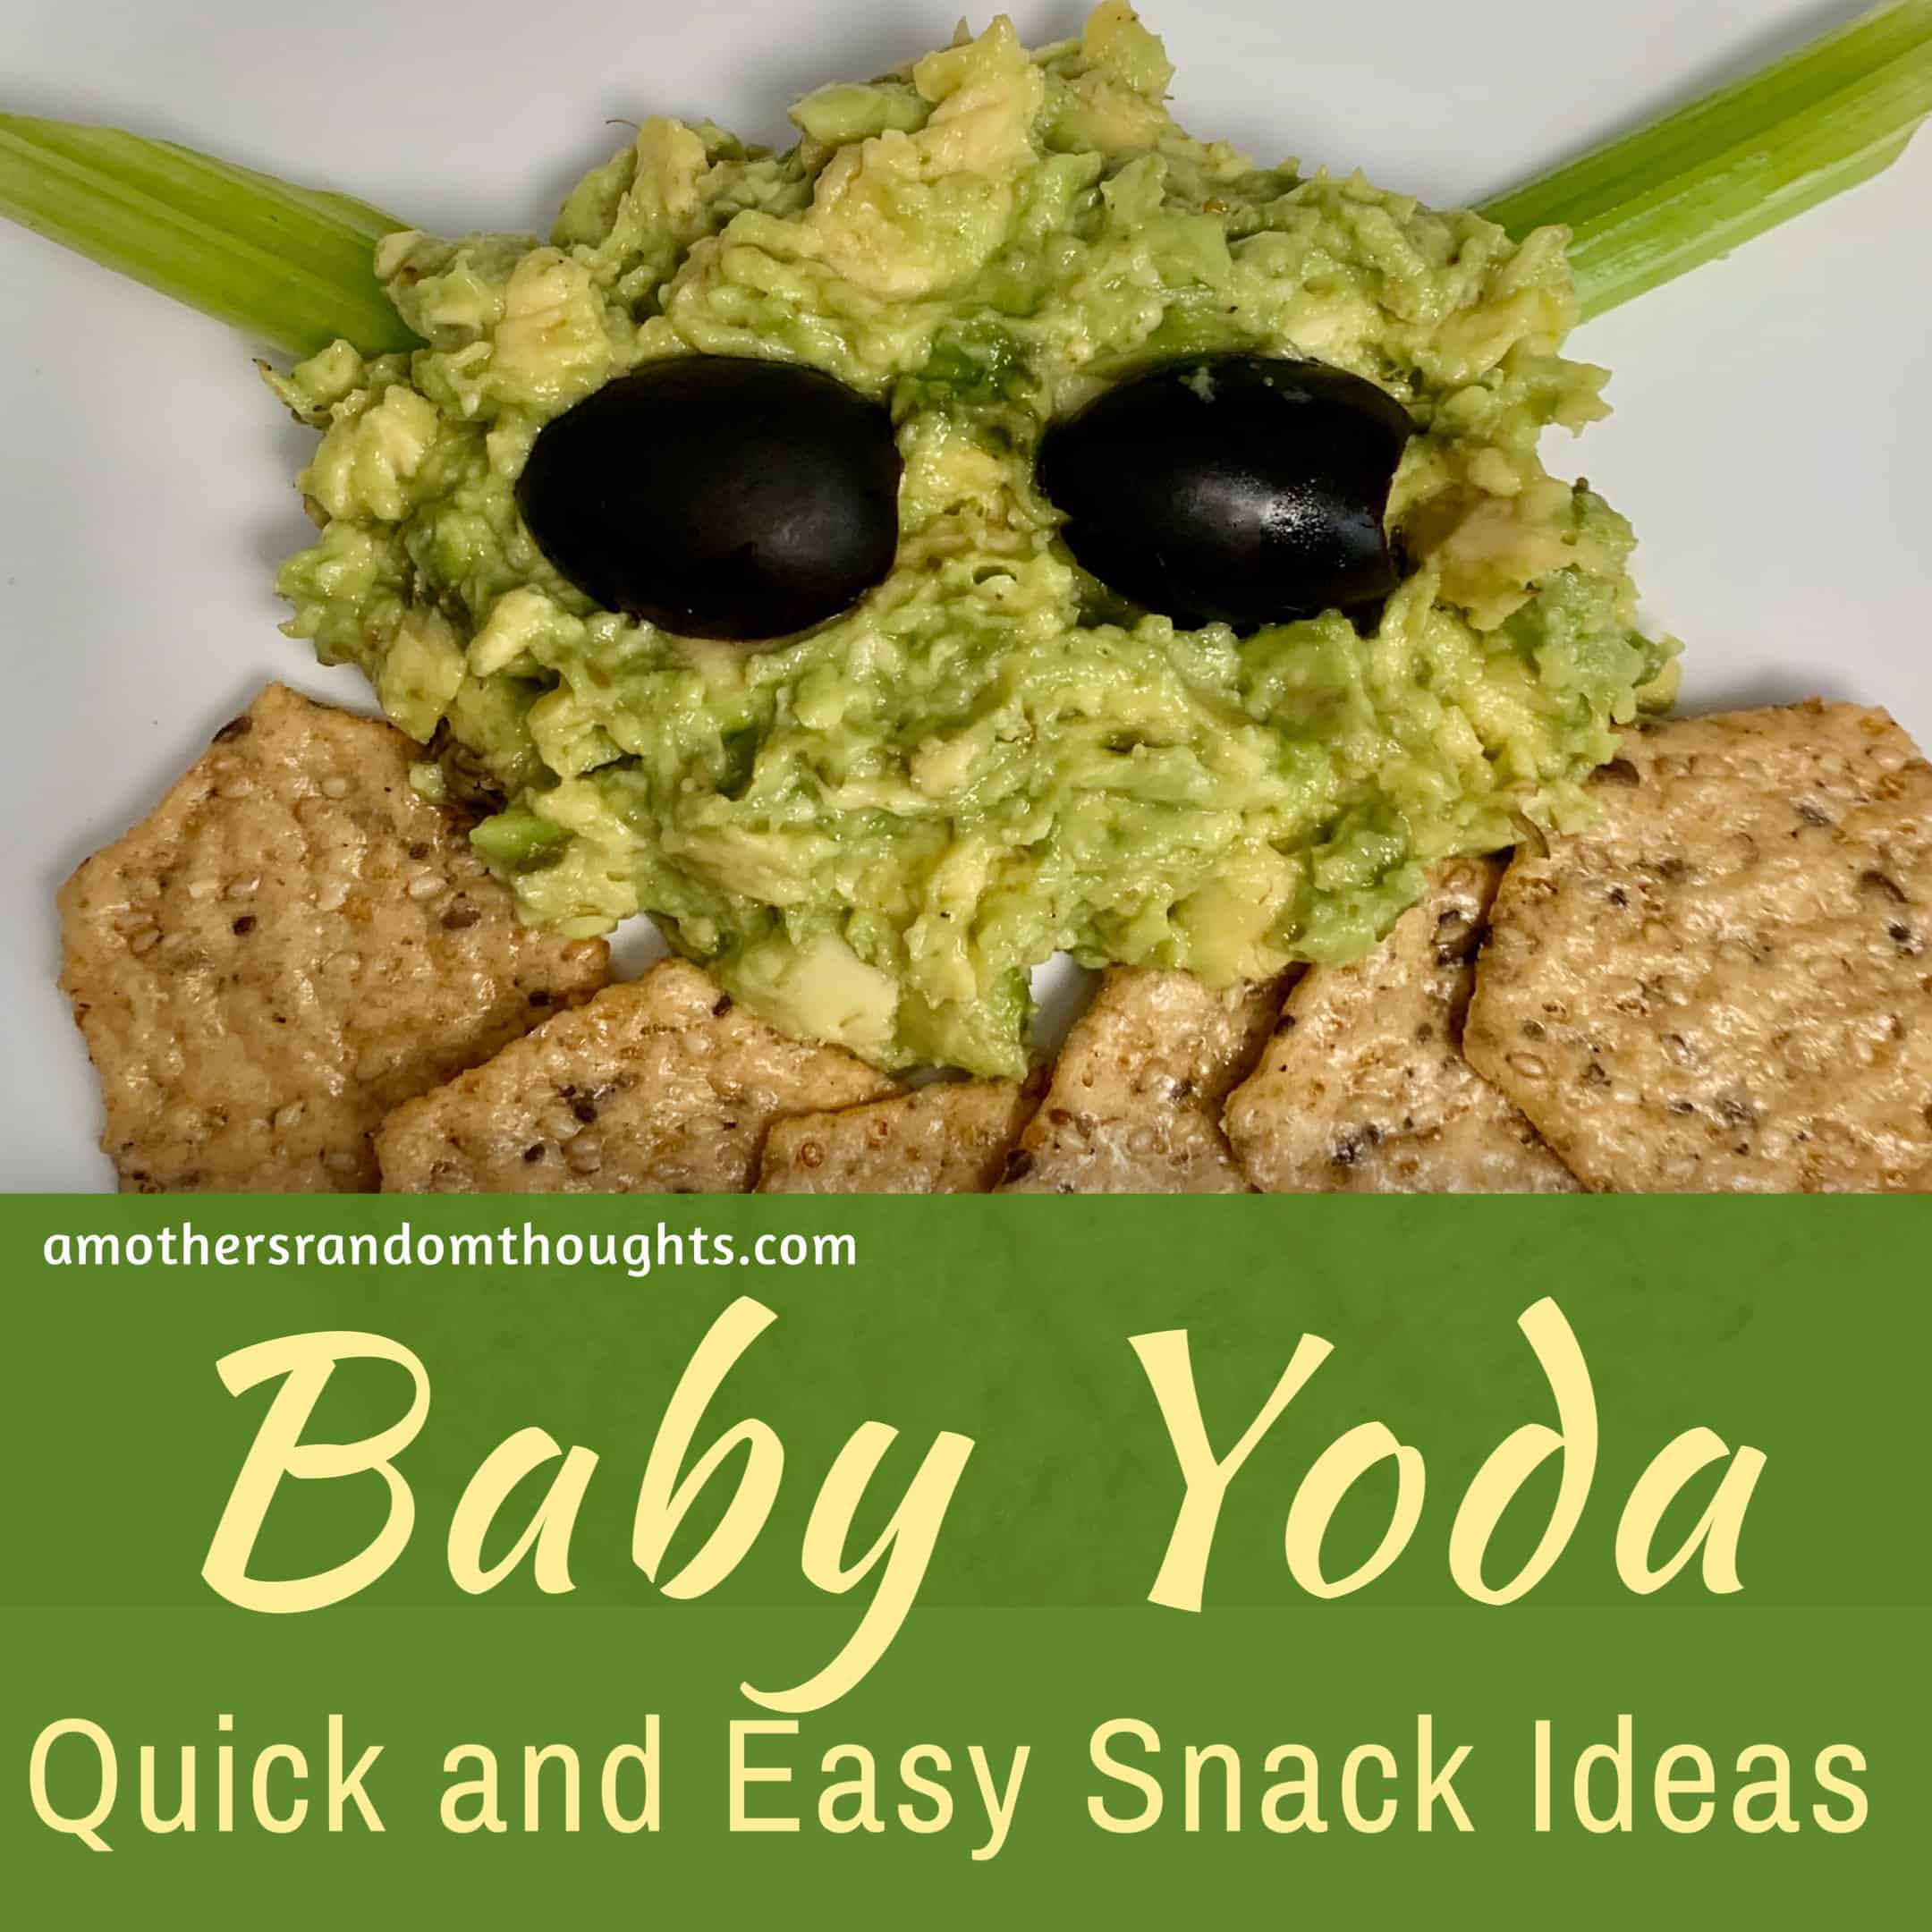 Baby Yoda quick and easy snack ideas